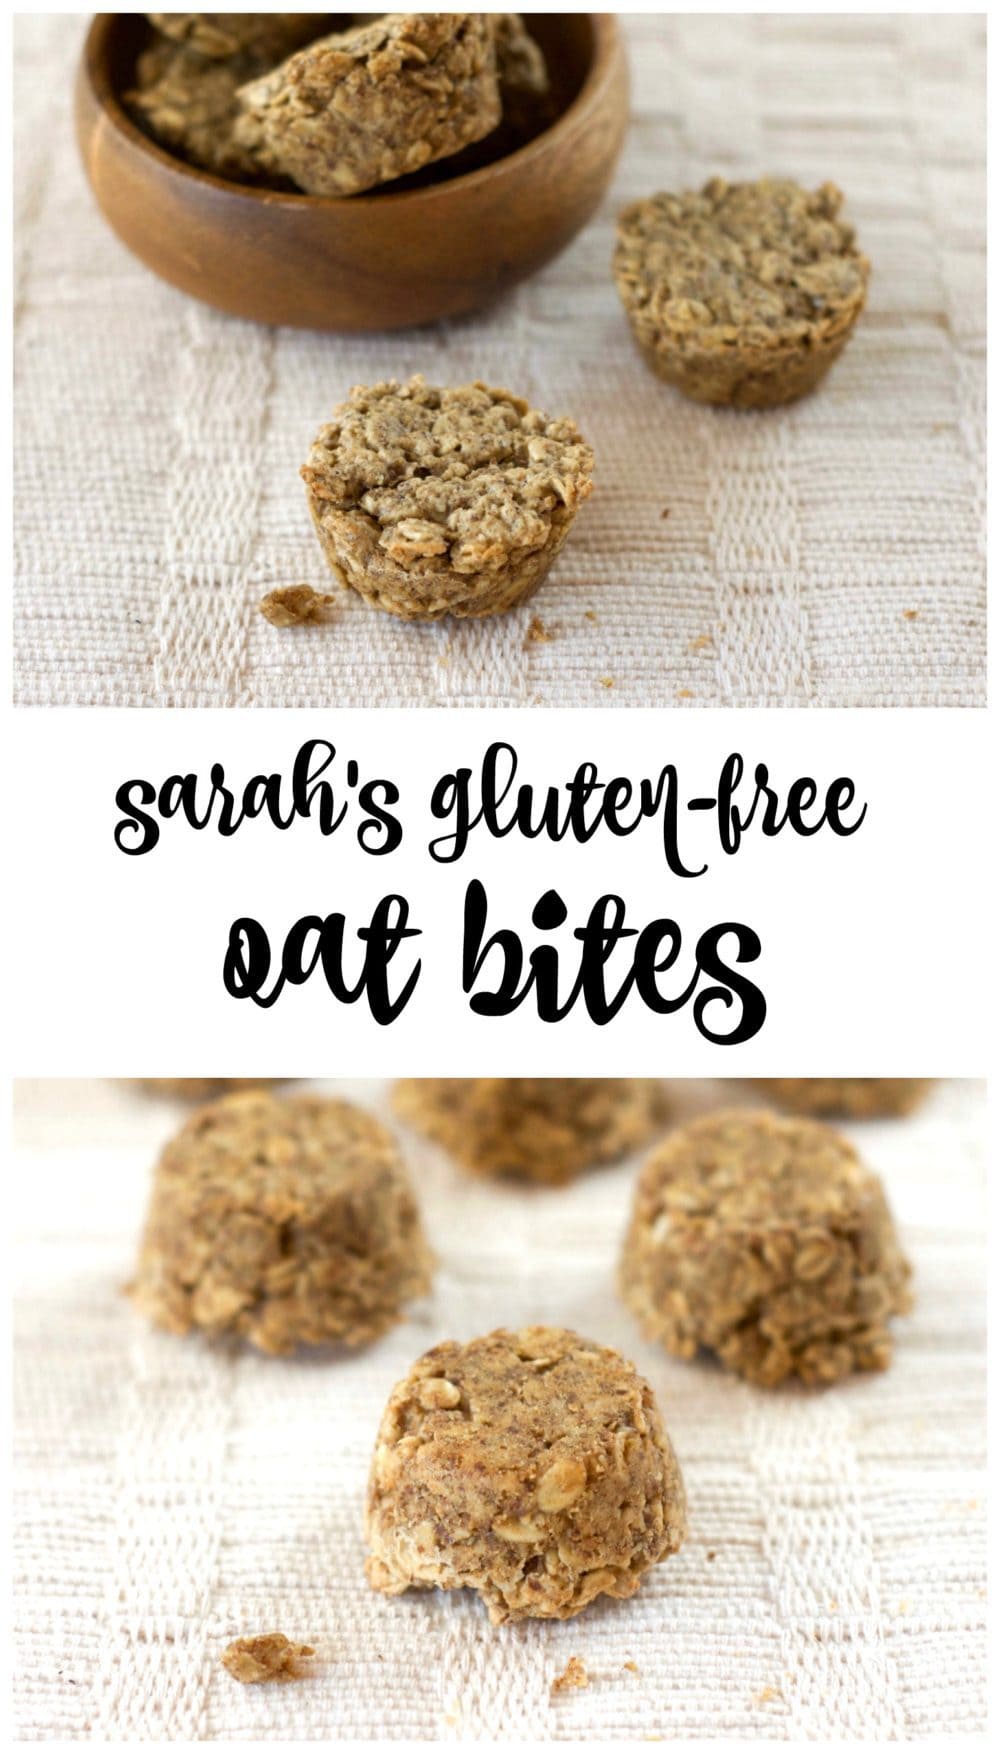 These gluten free oat bites are the perfect post-workout snack! They are portable, bite-sized, vegan, and filled with simple and complex carbohydrates for refueling. Just like a bite-sized granola bar! - @TheFitCookie #recipe #vegan #glutenfree